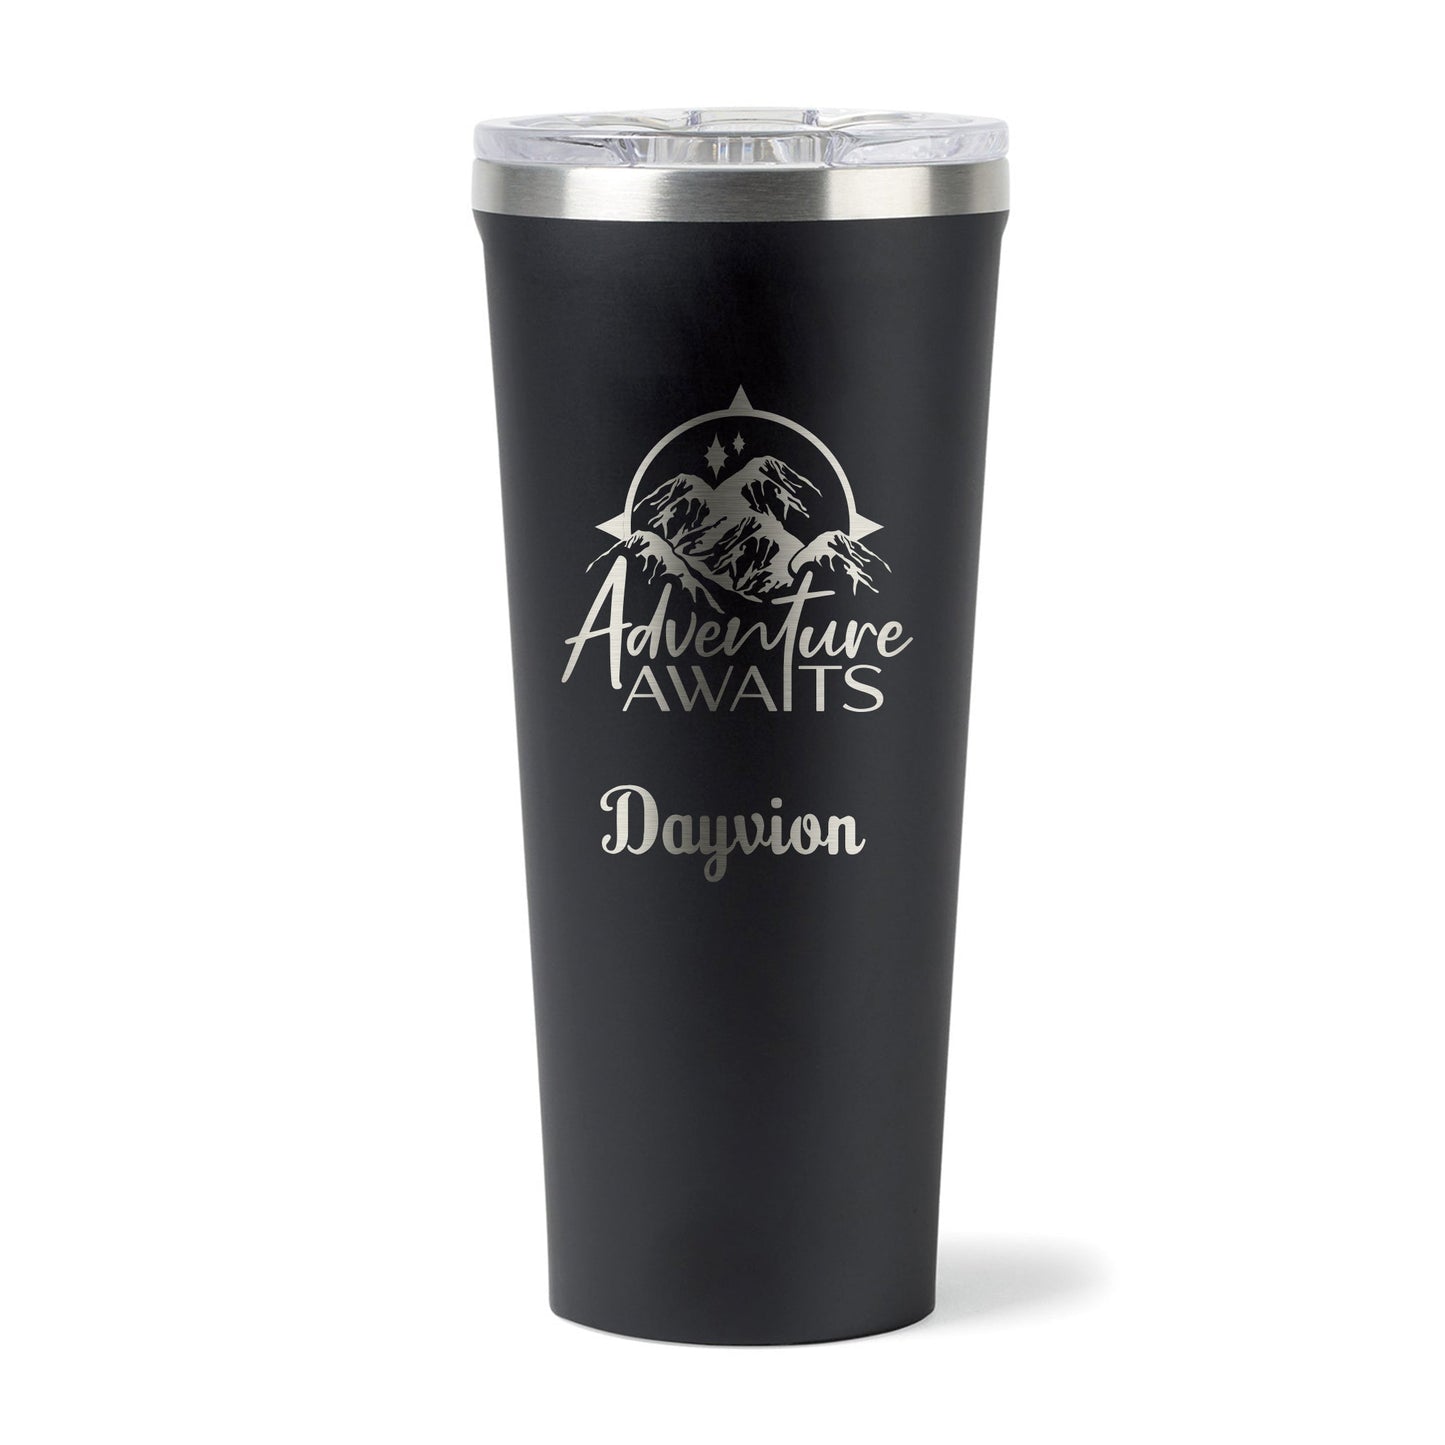 Personalized CORKCICLE® Tumbler 24 oz - Etchified-CORKCICLE®-ETC-GMLN-100482-100482-006